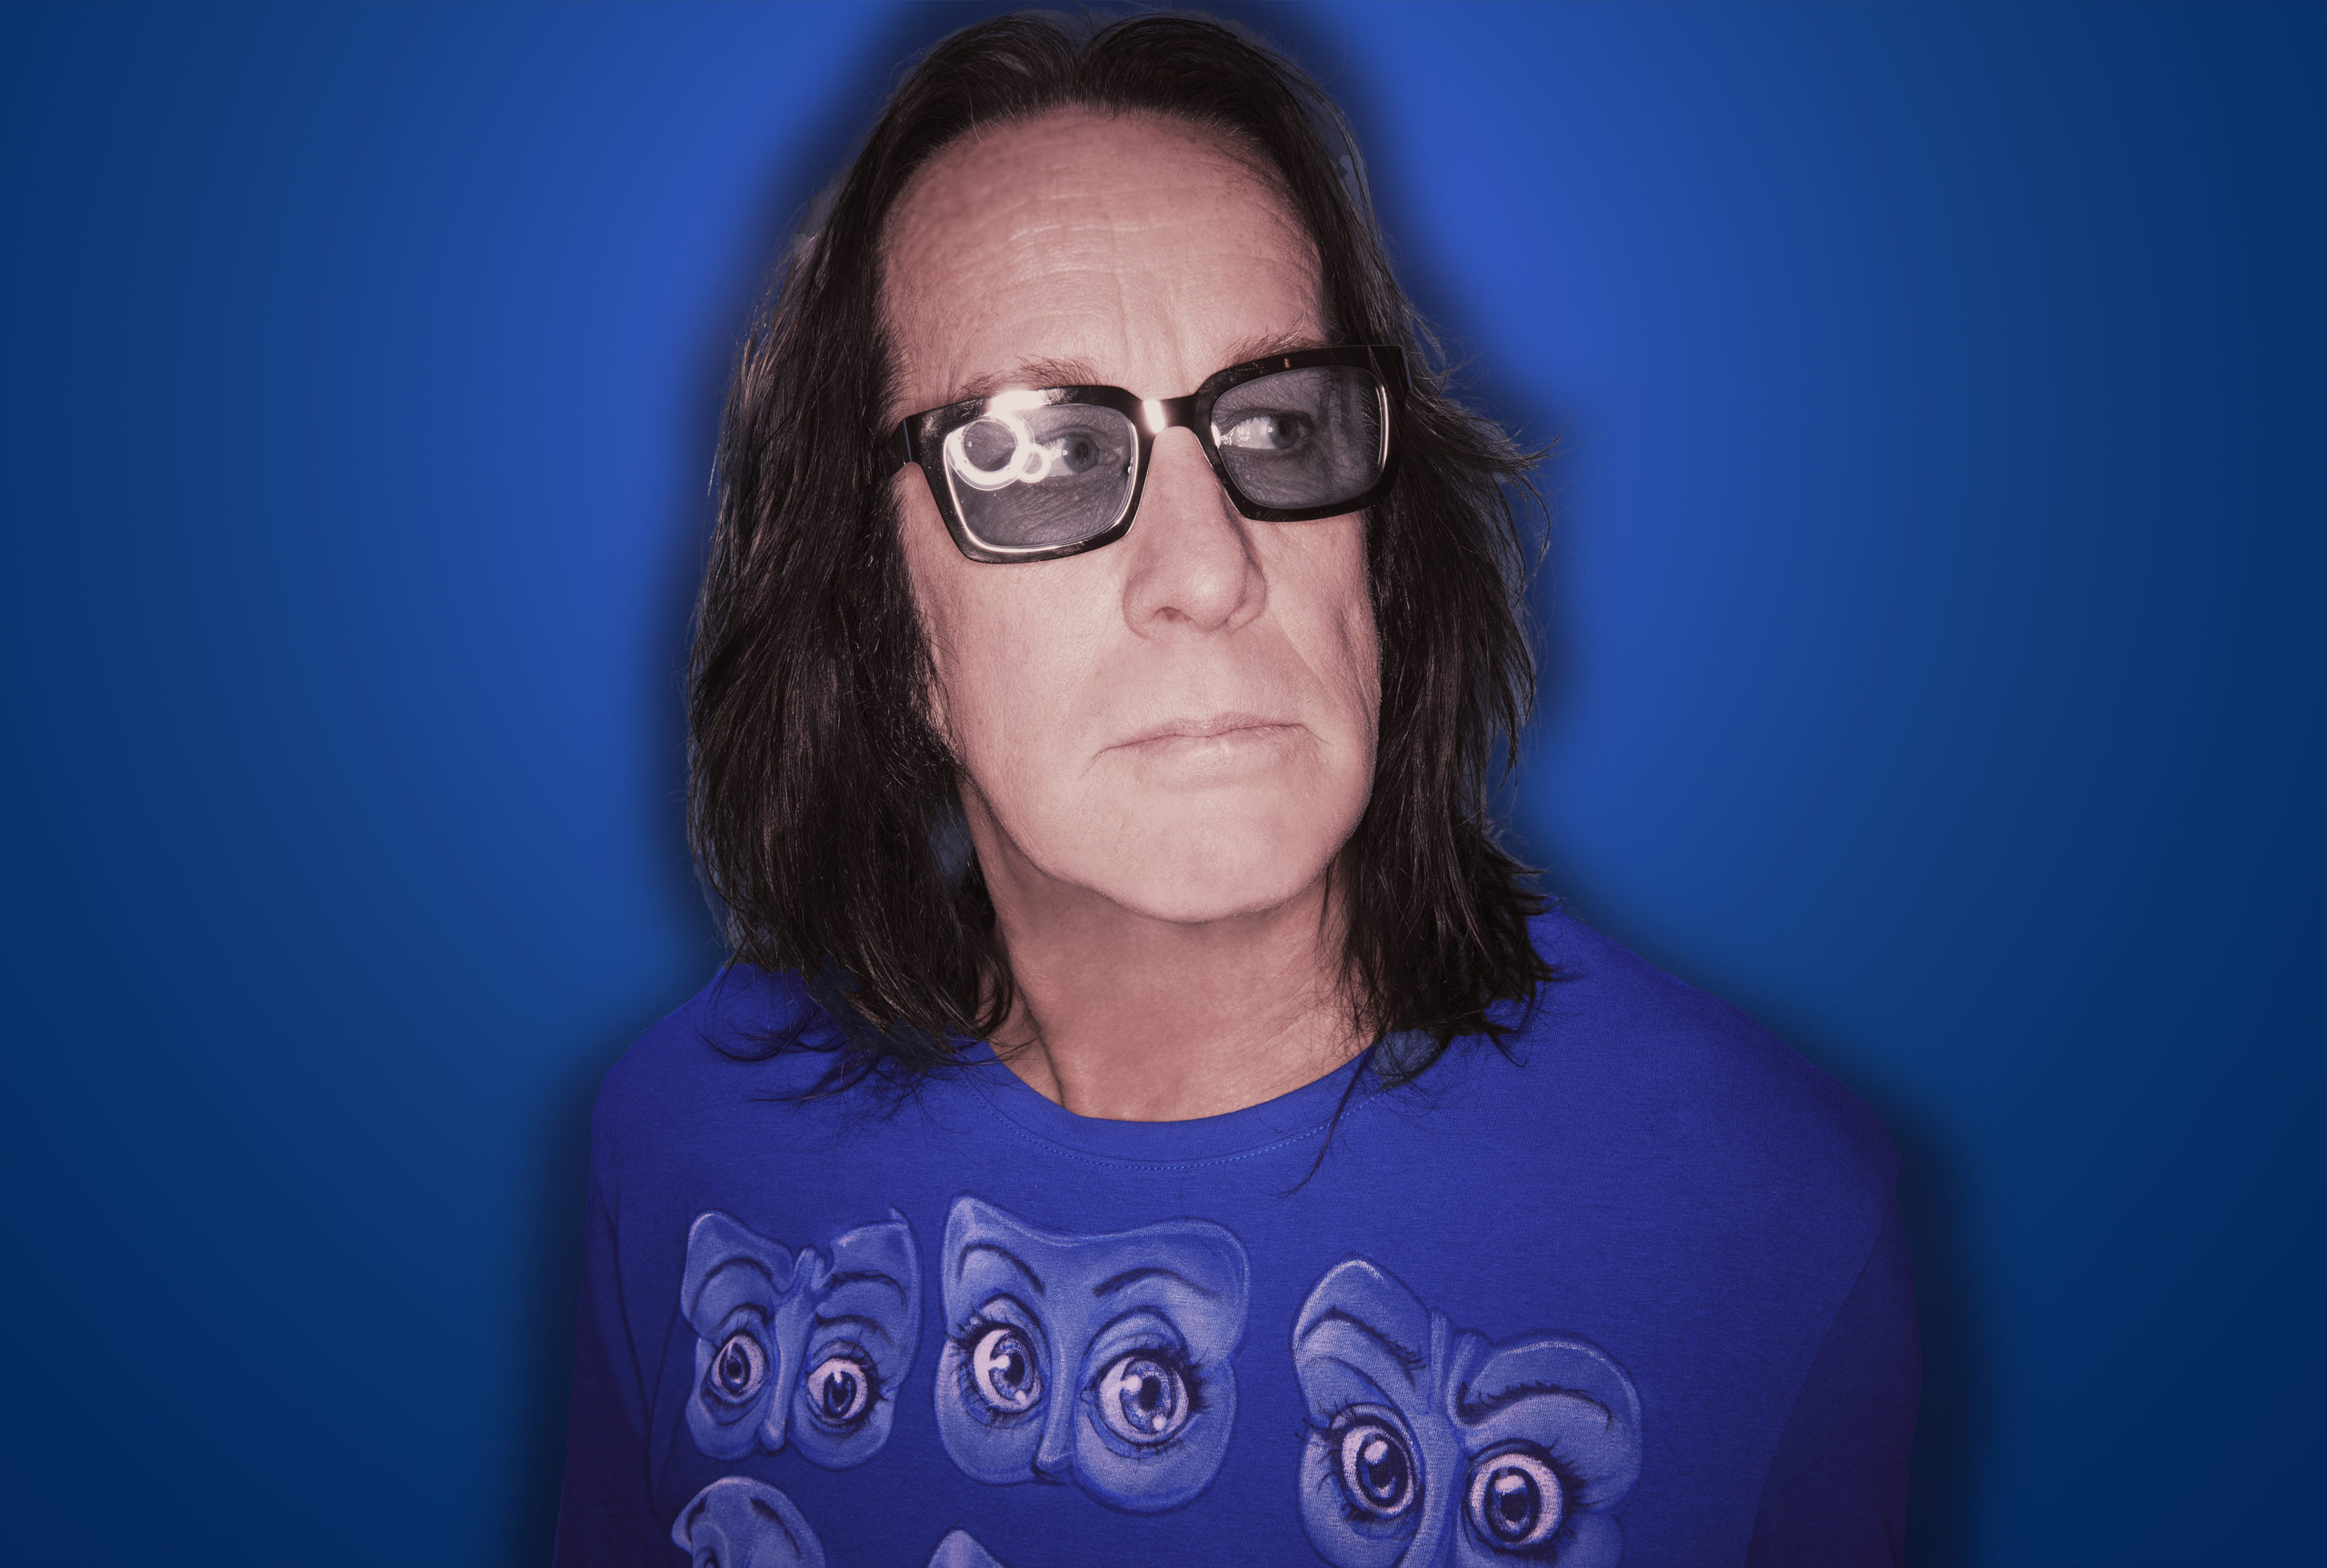 Visionary Todd Rundgren leads the livestreaming charge with “Clearly